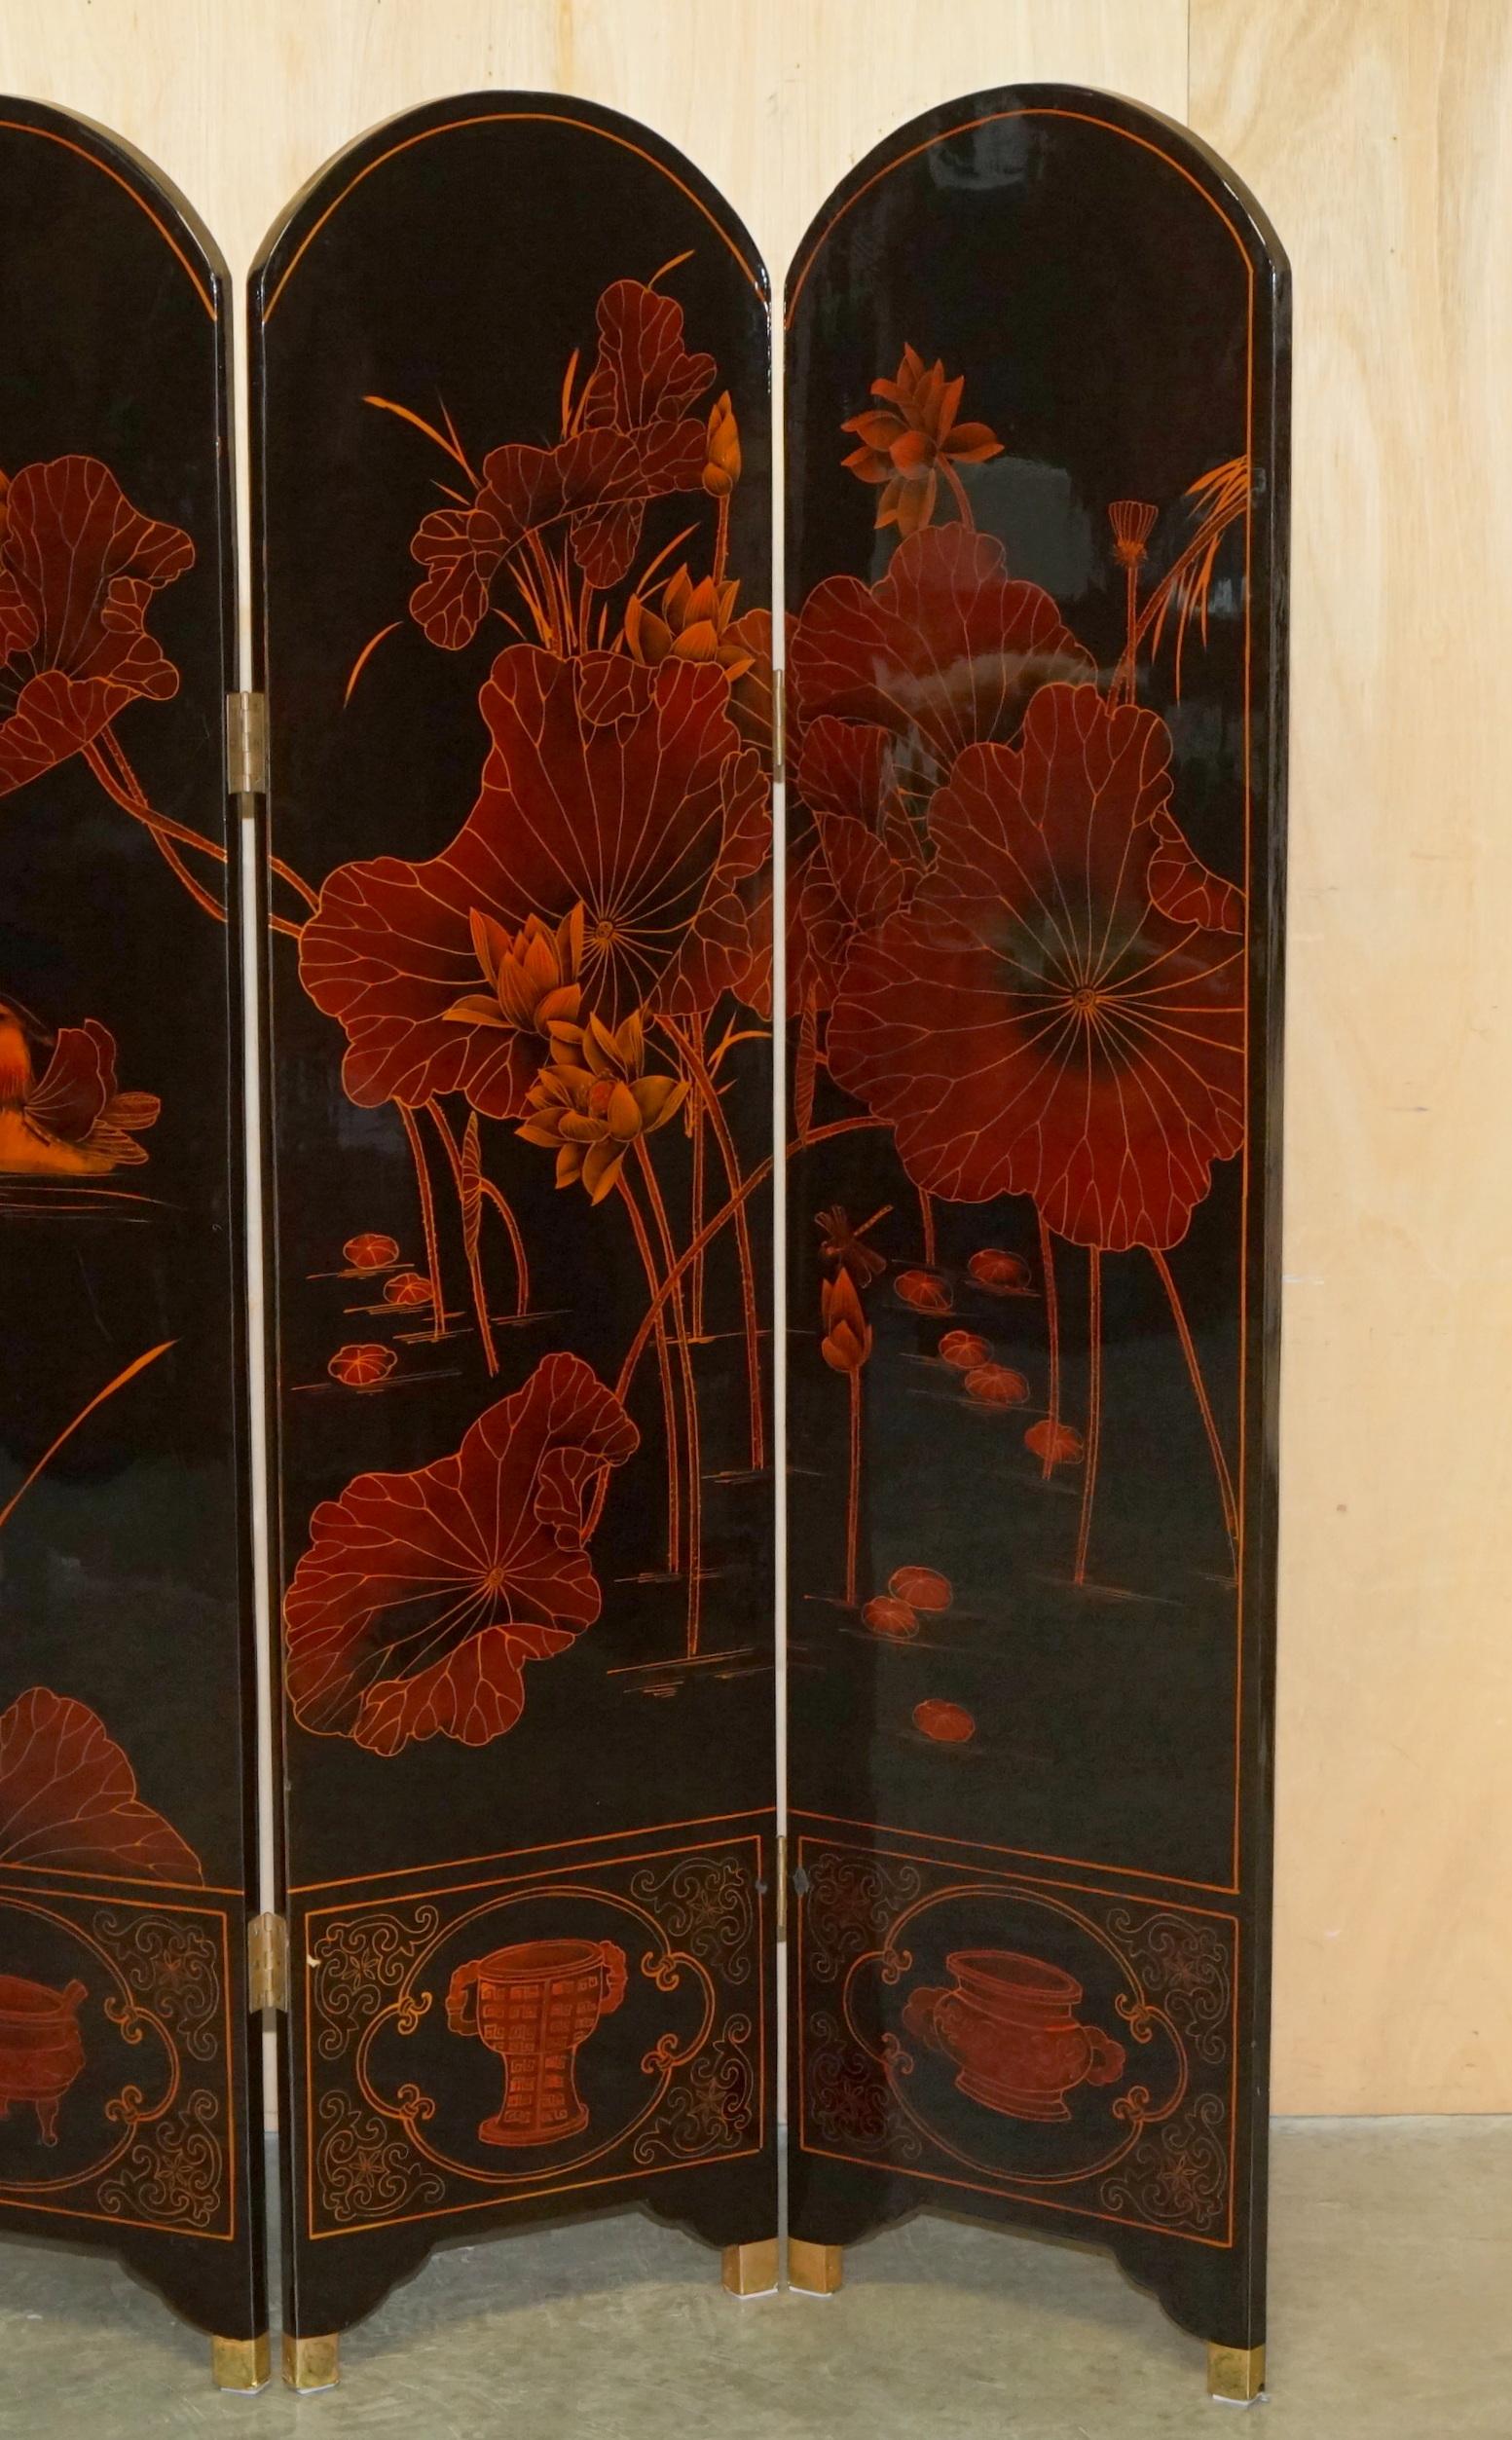 FINE ANTIQUE ROOM DIVIDER TITLED IN CHINESE 